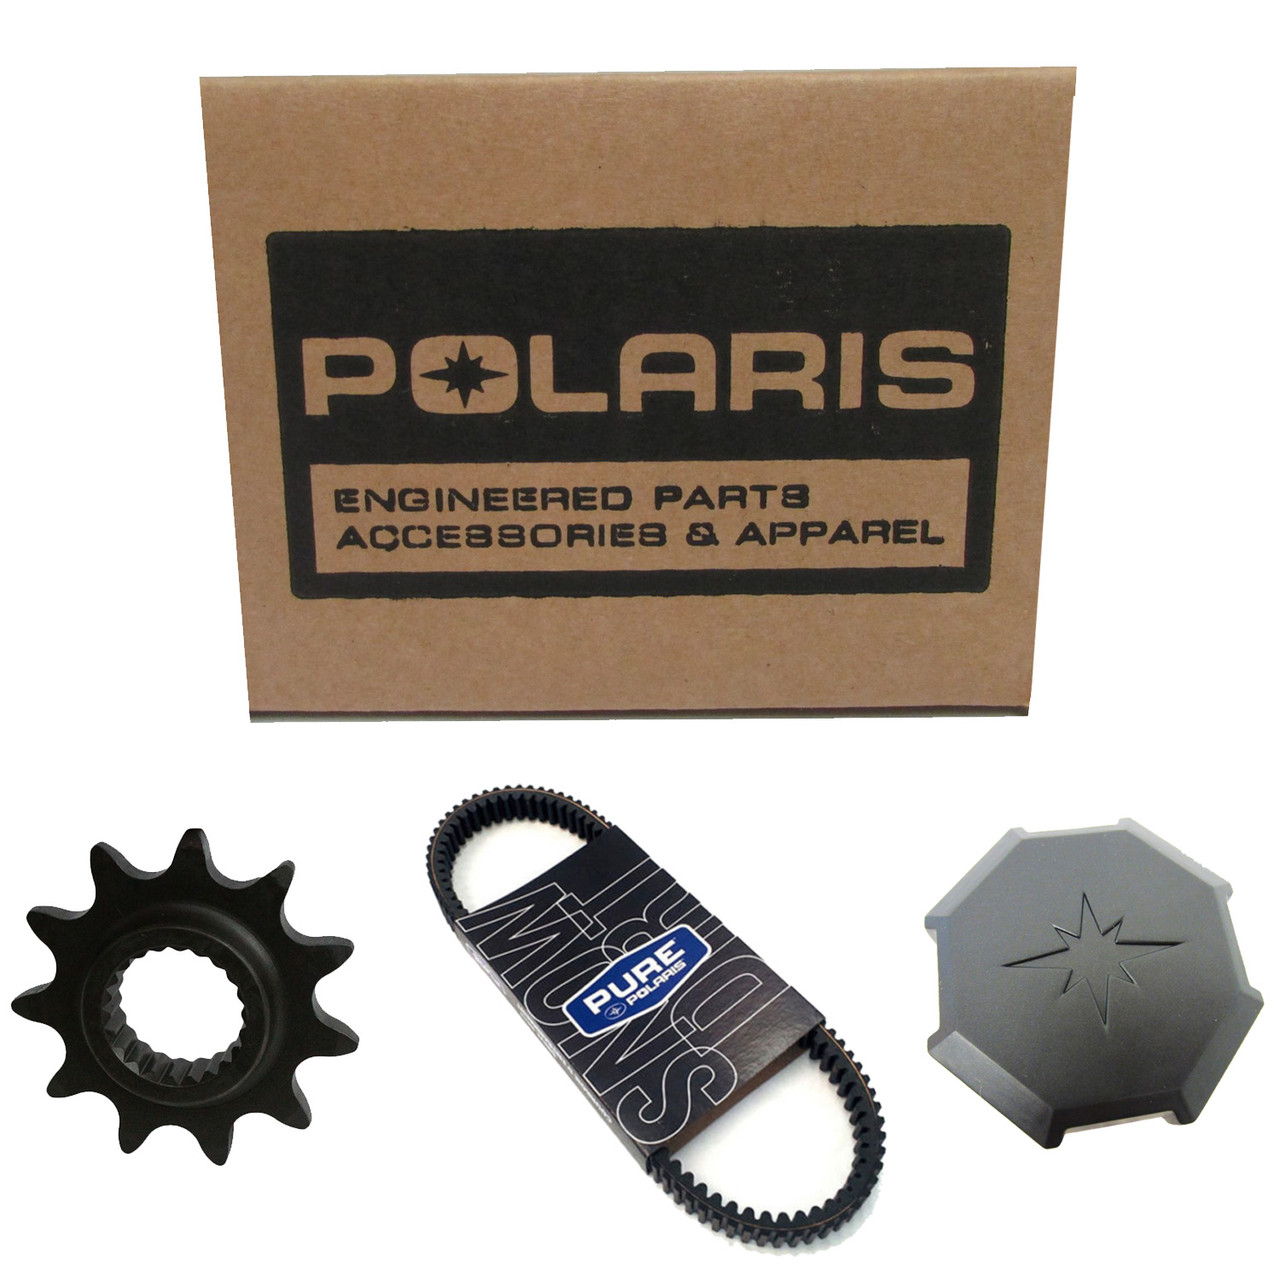 Polaris New OEM Cover-Tstat Dual Out Mach, 5139019